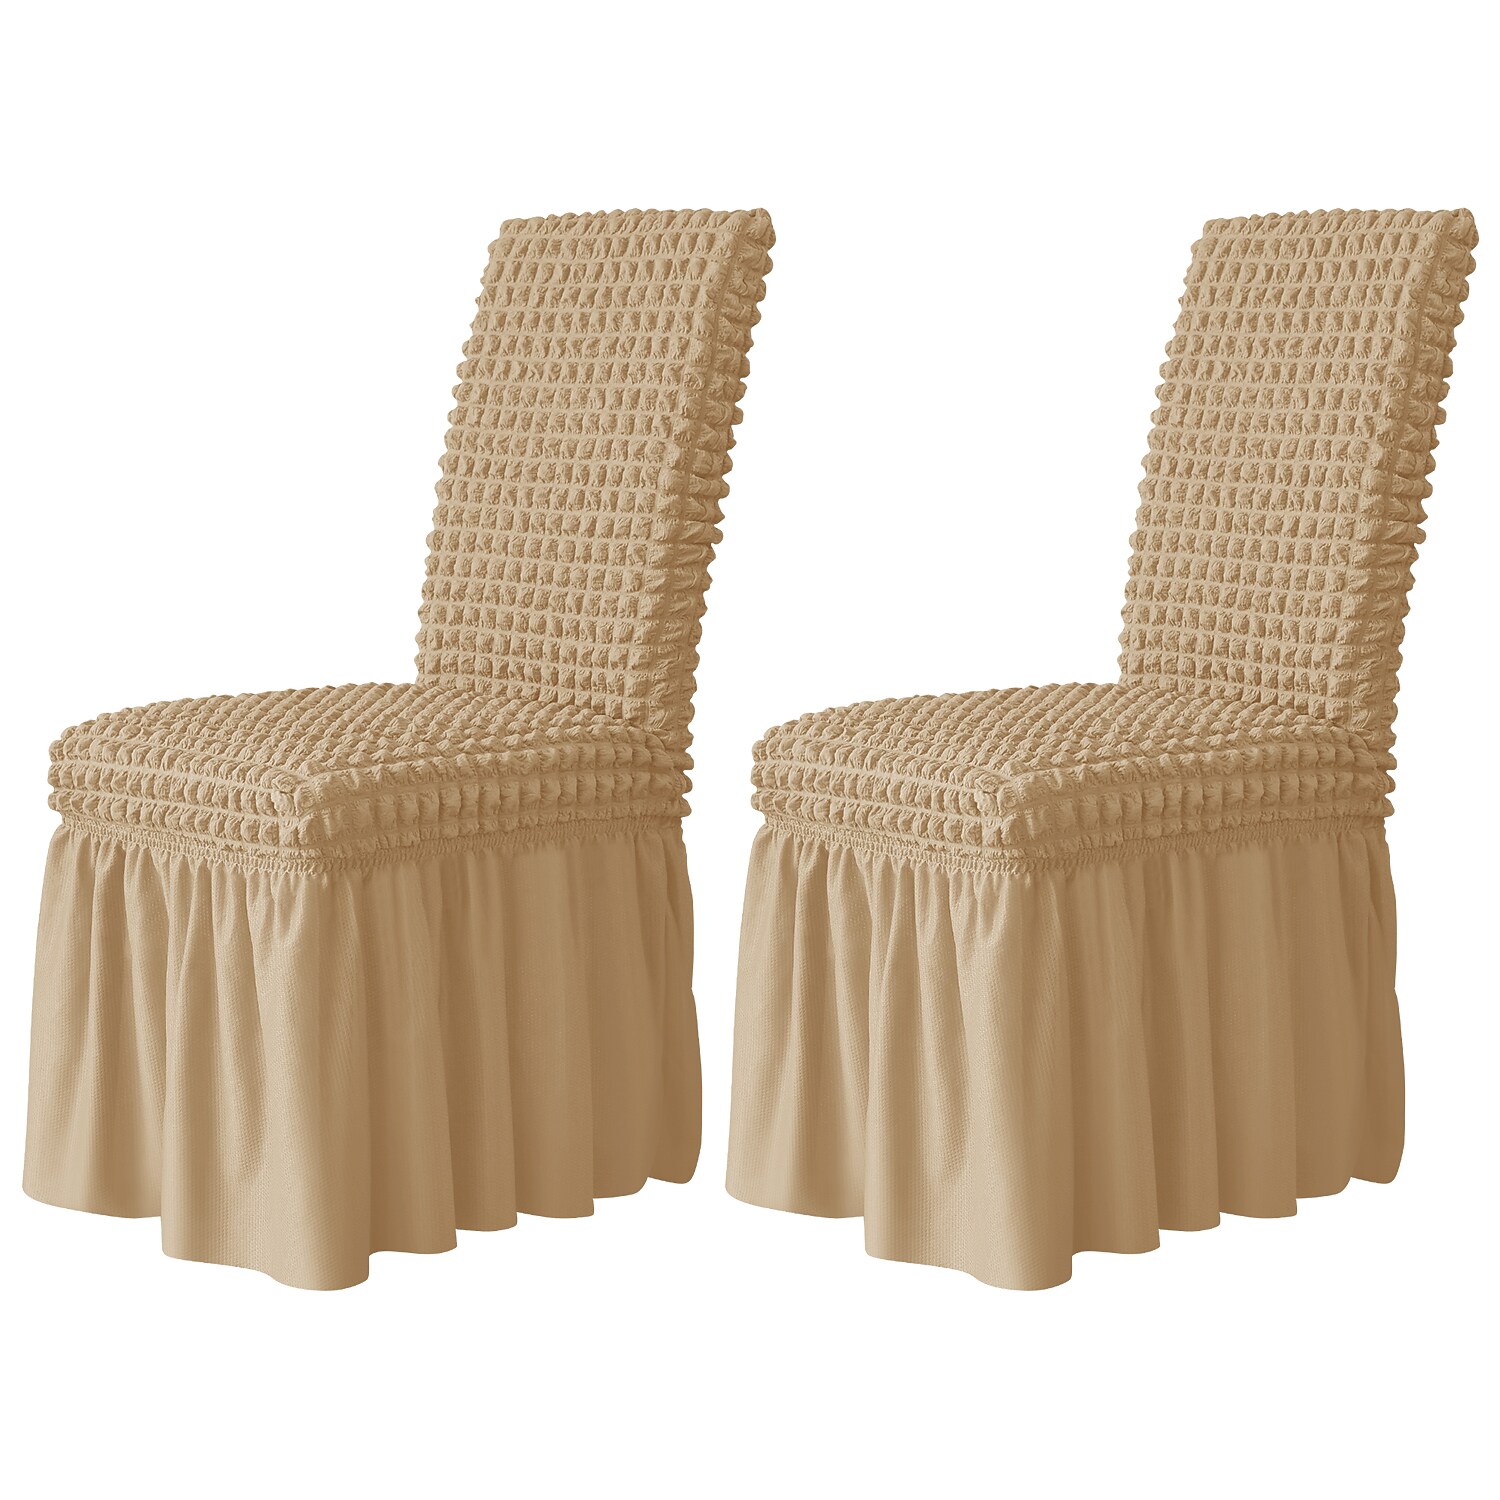 2 Pcs Chair Covers with Skirt Parsons Chair Slipcovers Furniture Protector